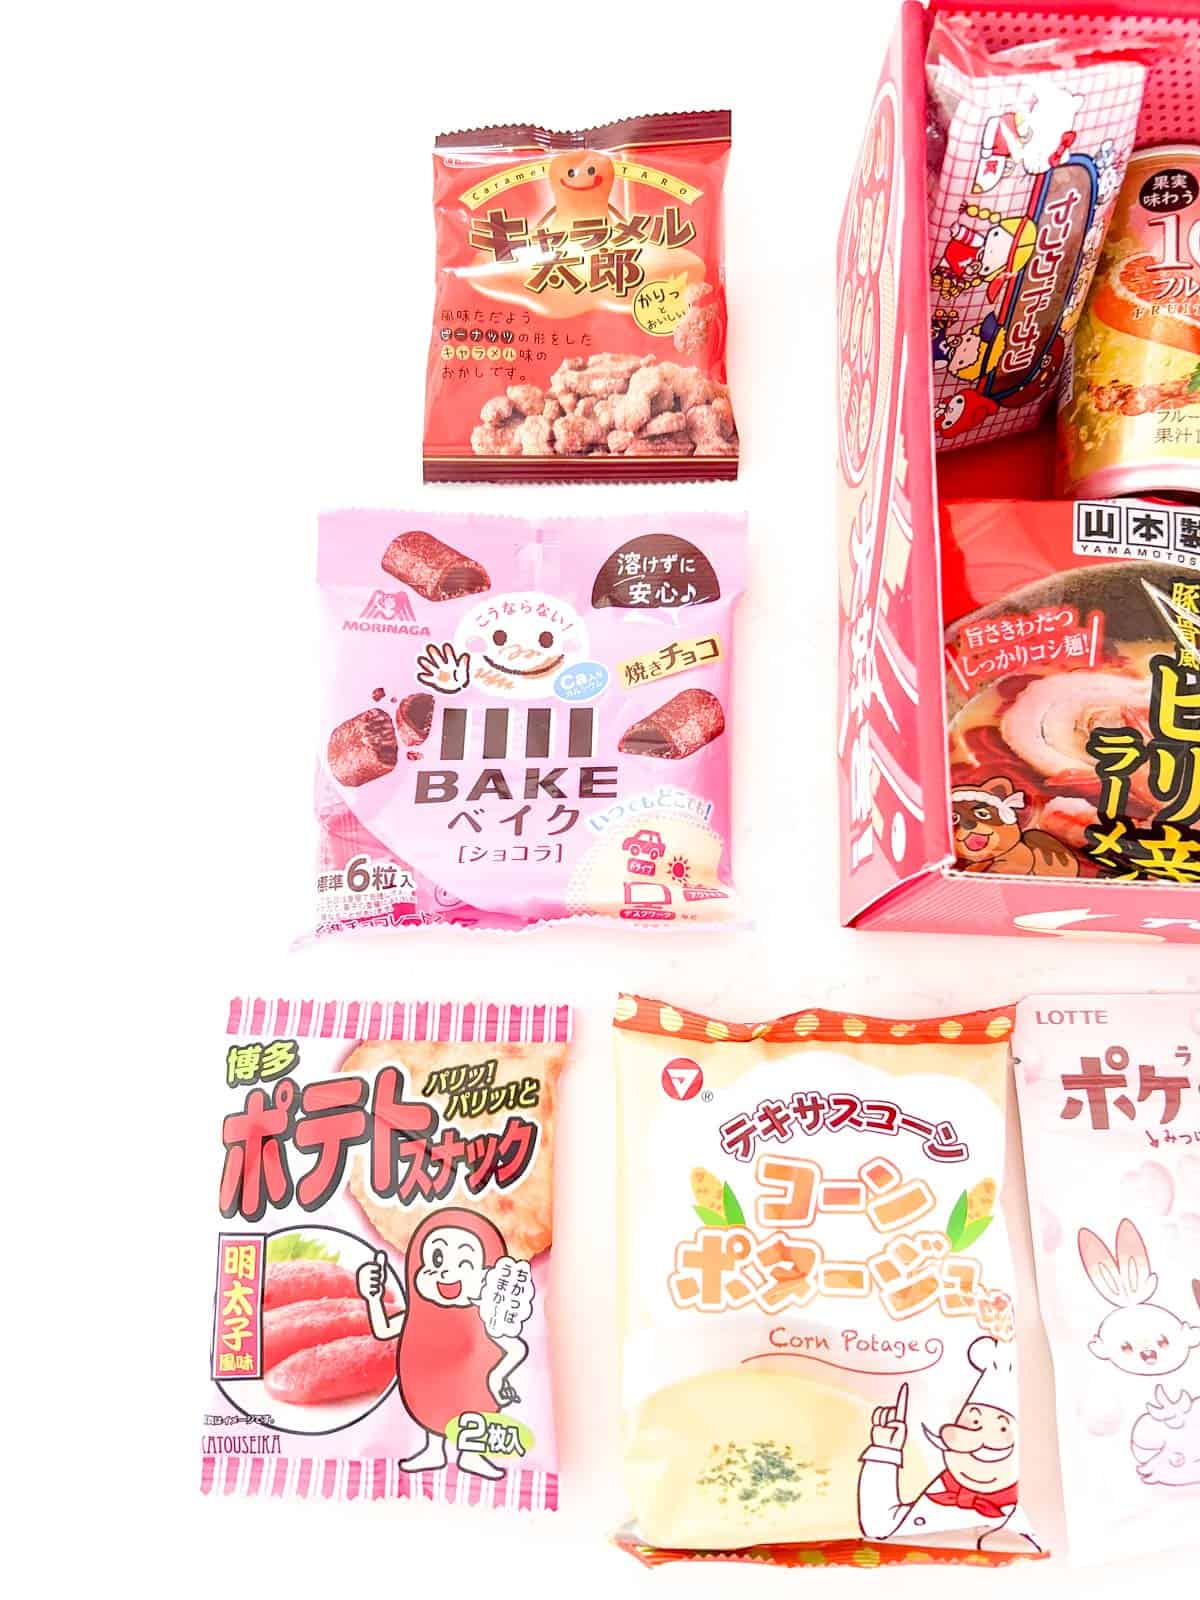 snack items in Japanese box